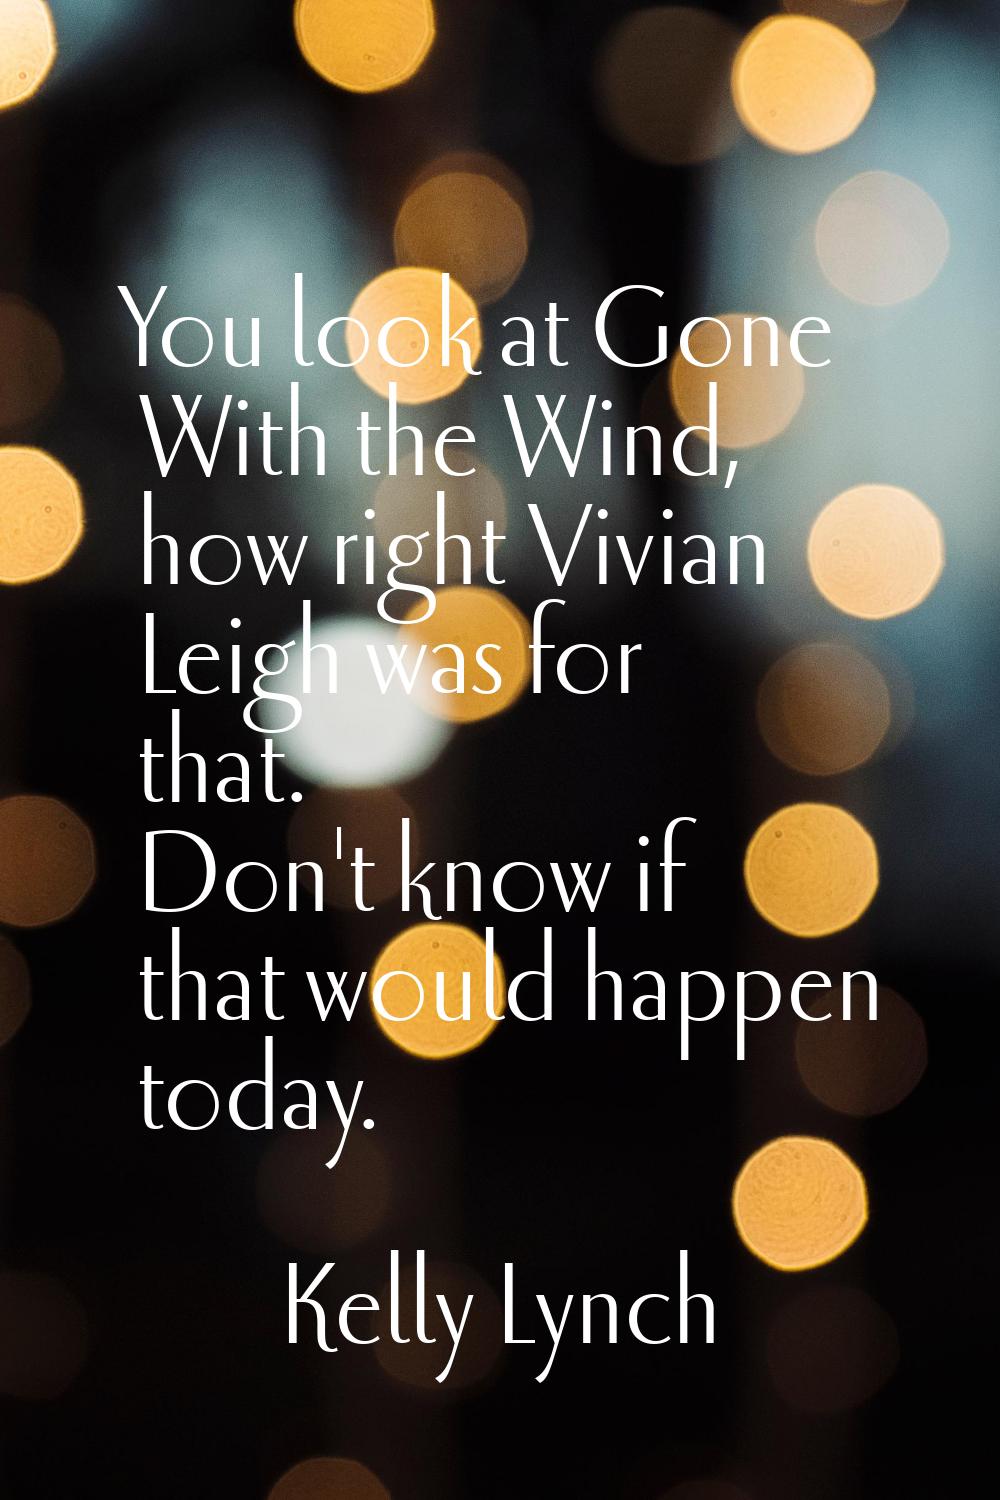 You look at Gone With the Wind, how right Vivian Leigh was for that. Don't know if that would happe